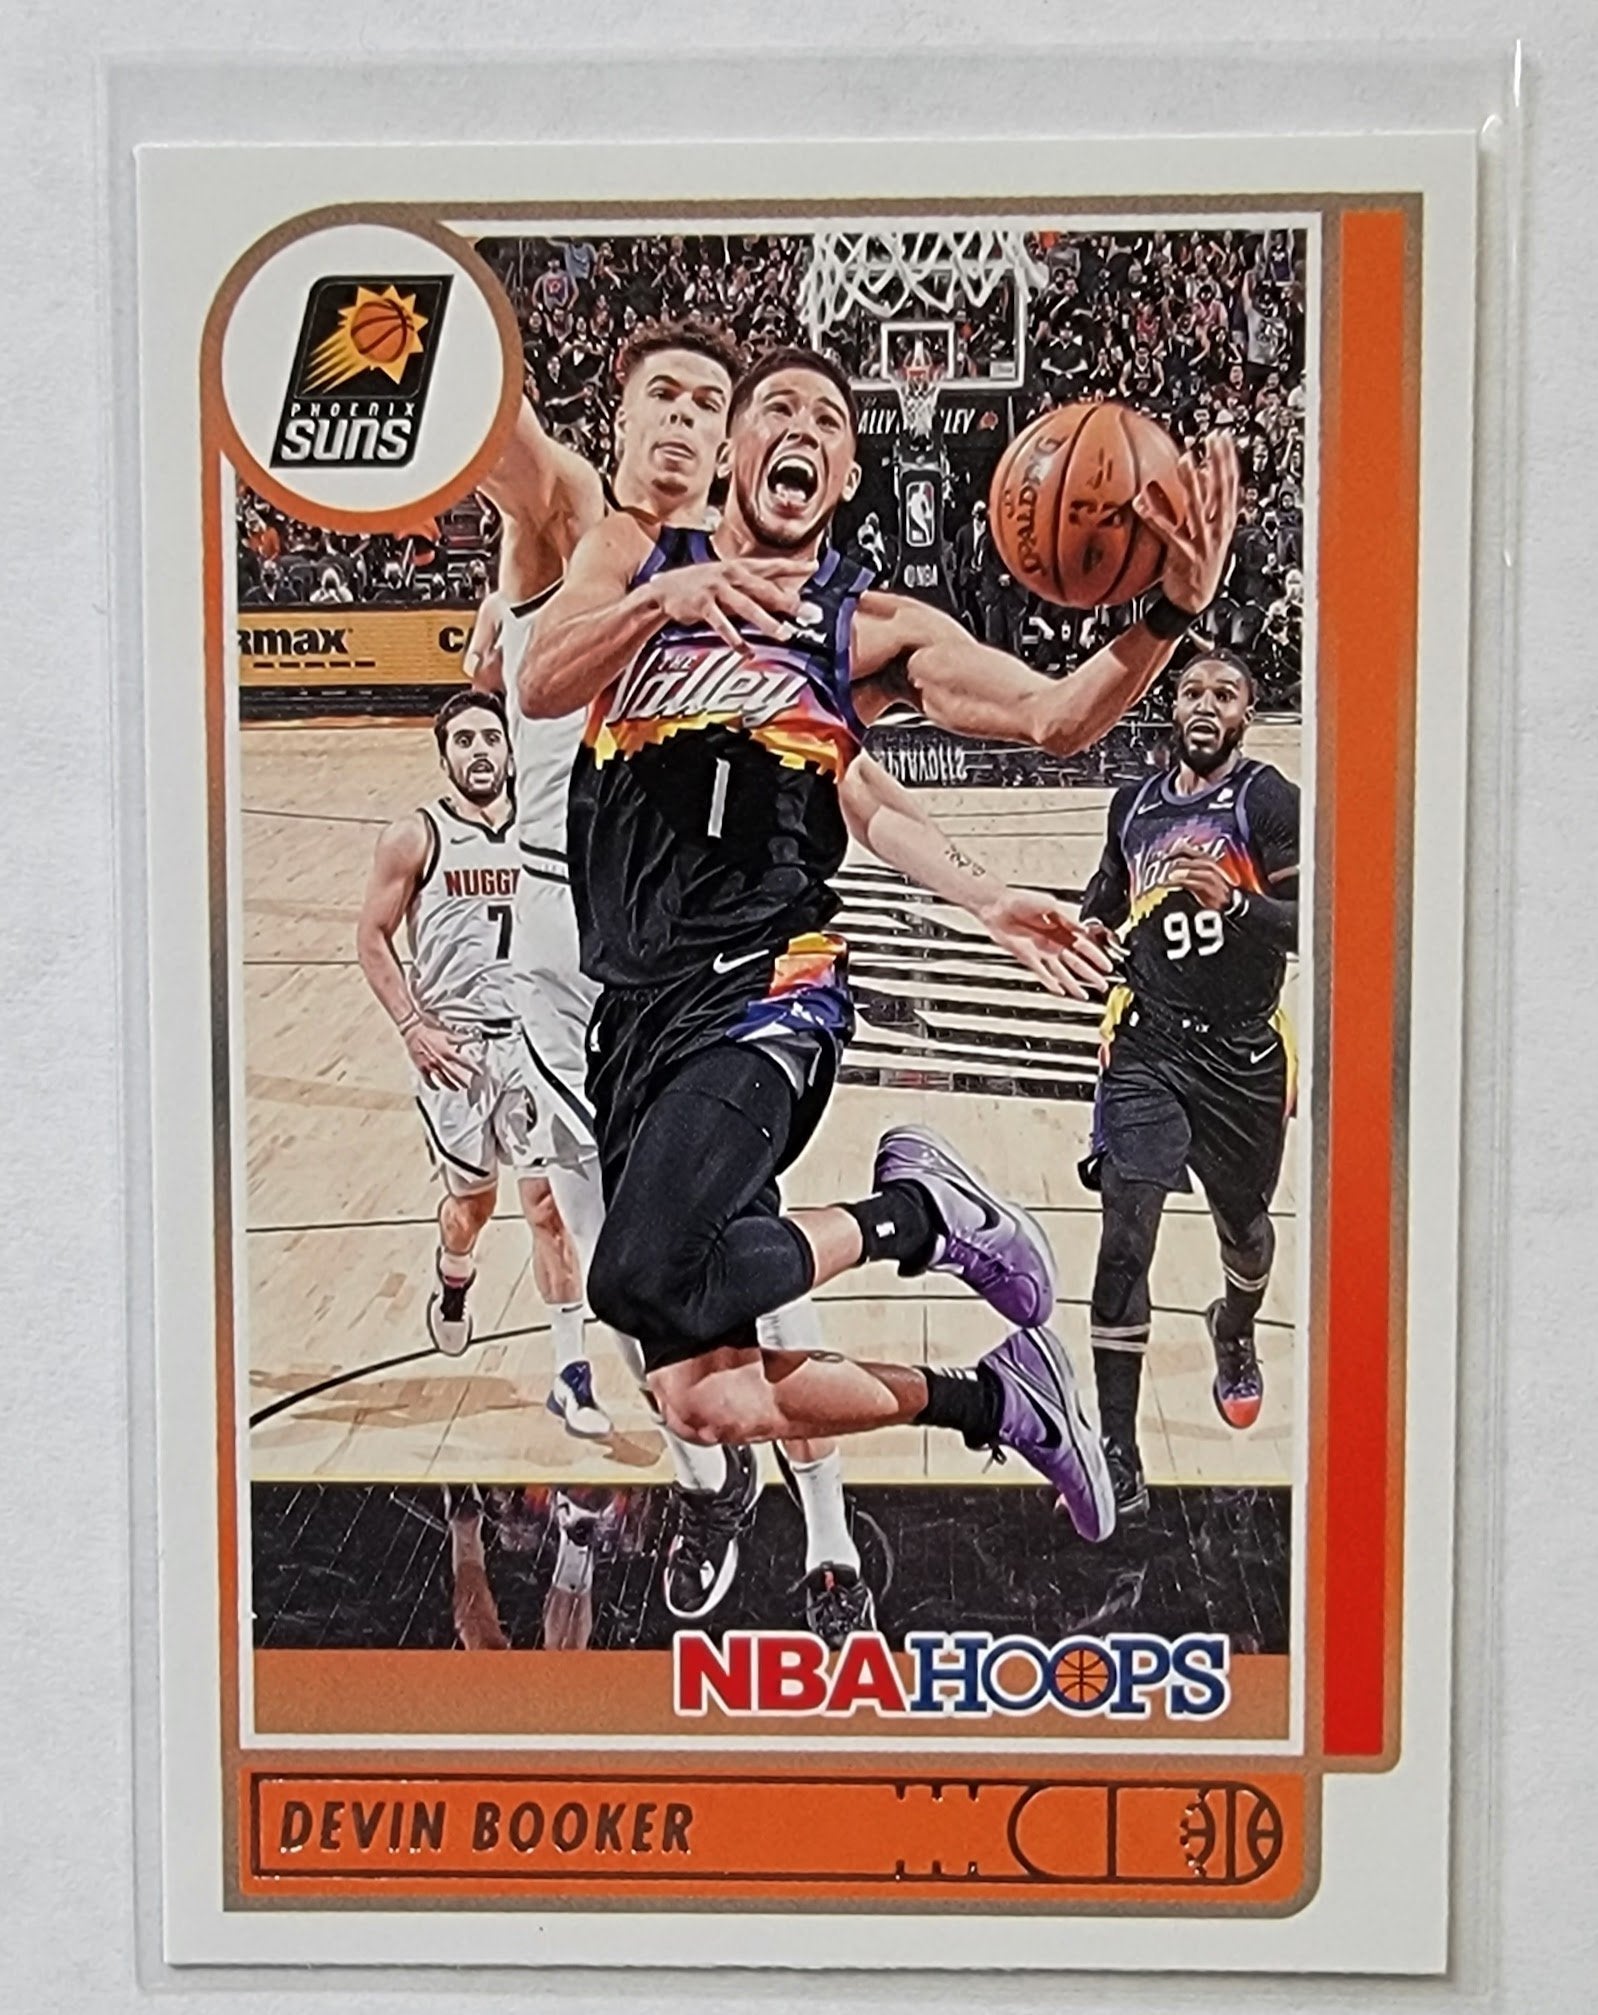 2021-22 Panini NBA Hoops Devin Booker Basketball Card AVM1 simple Xclusive Collectibles   